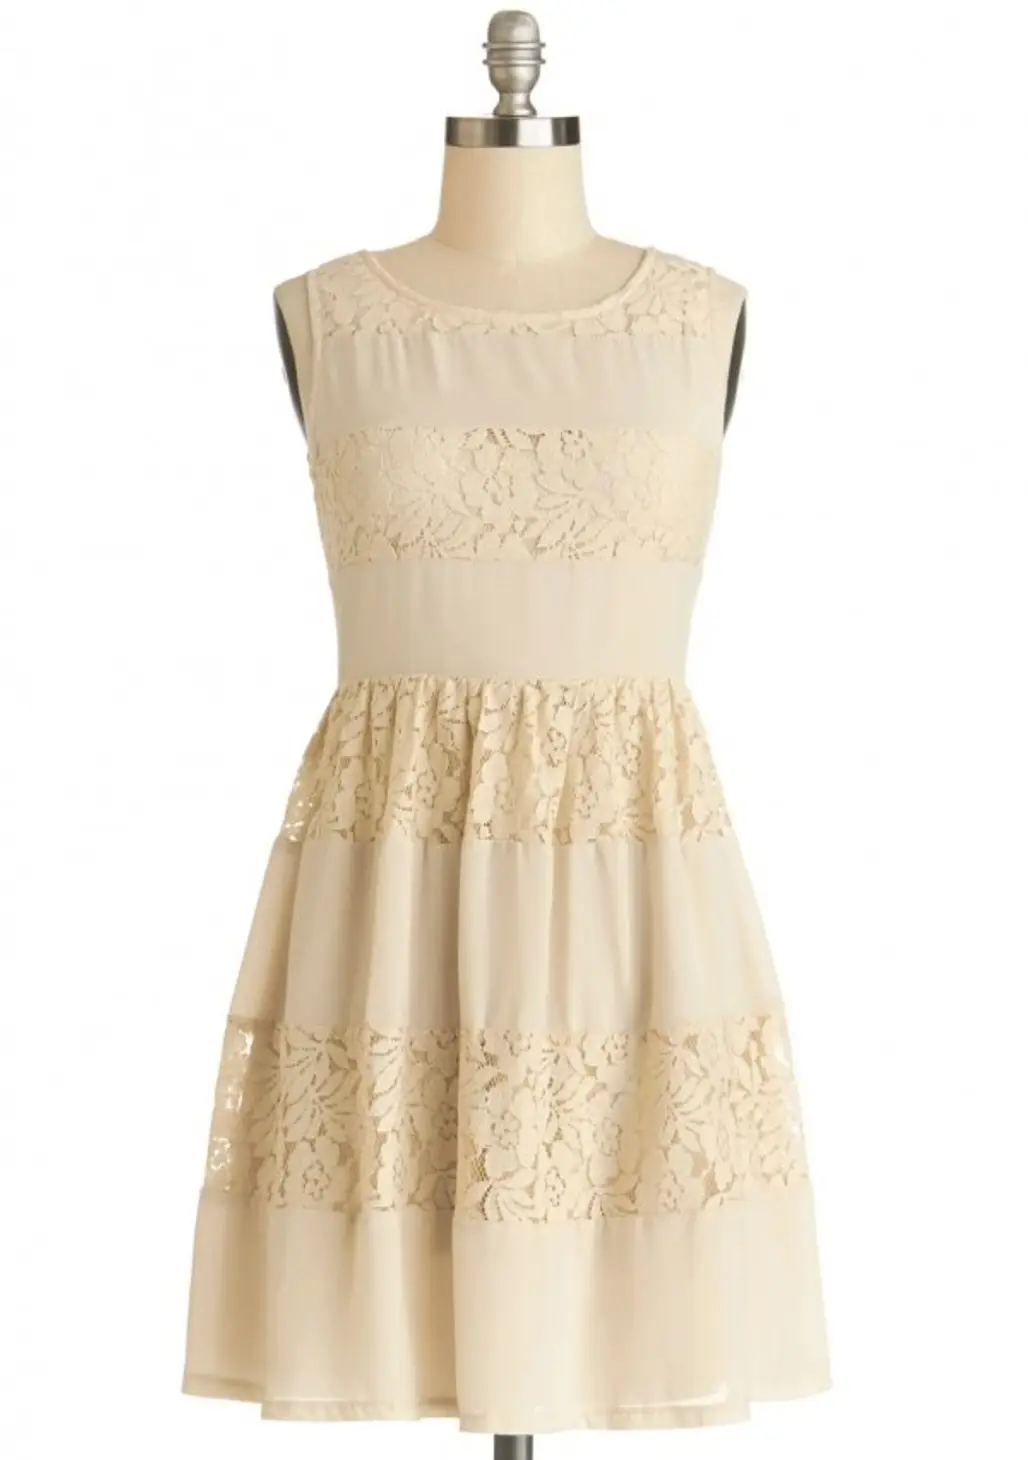 Lattes in Lace Dress